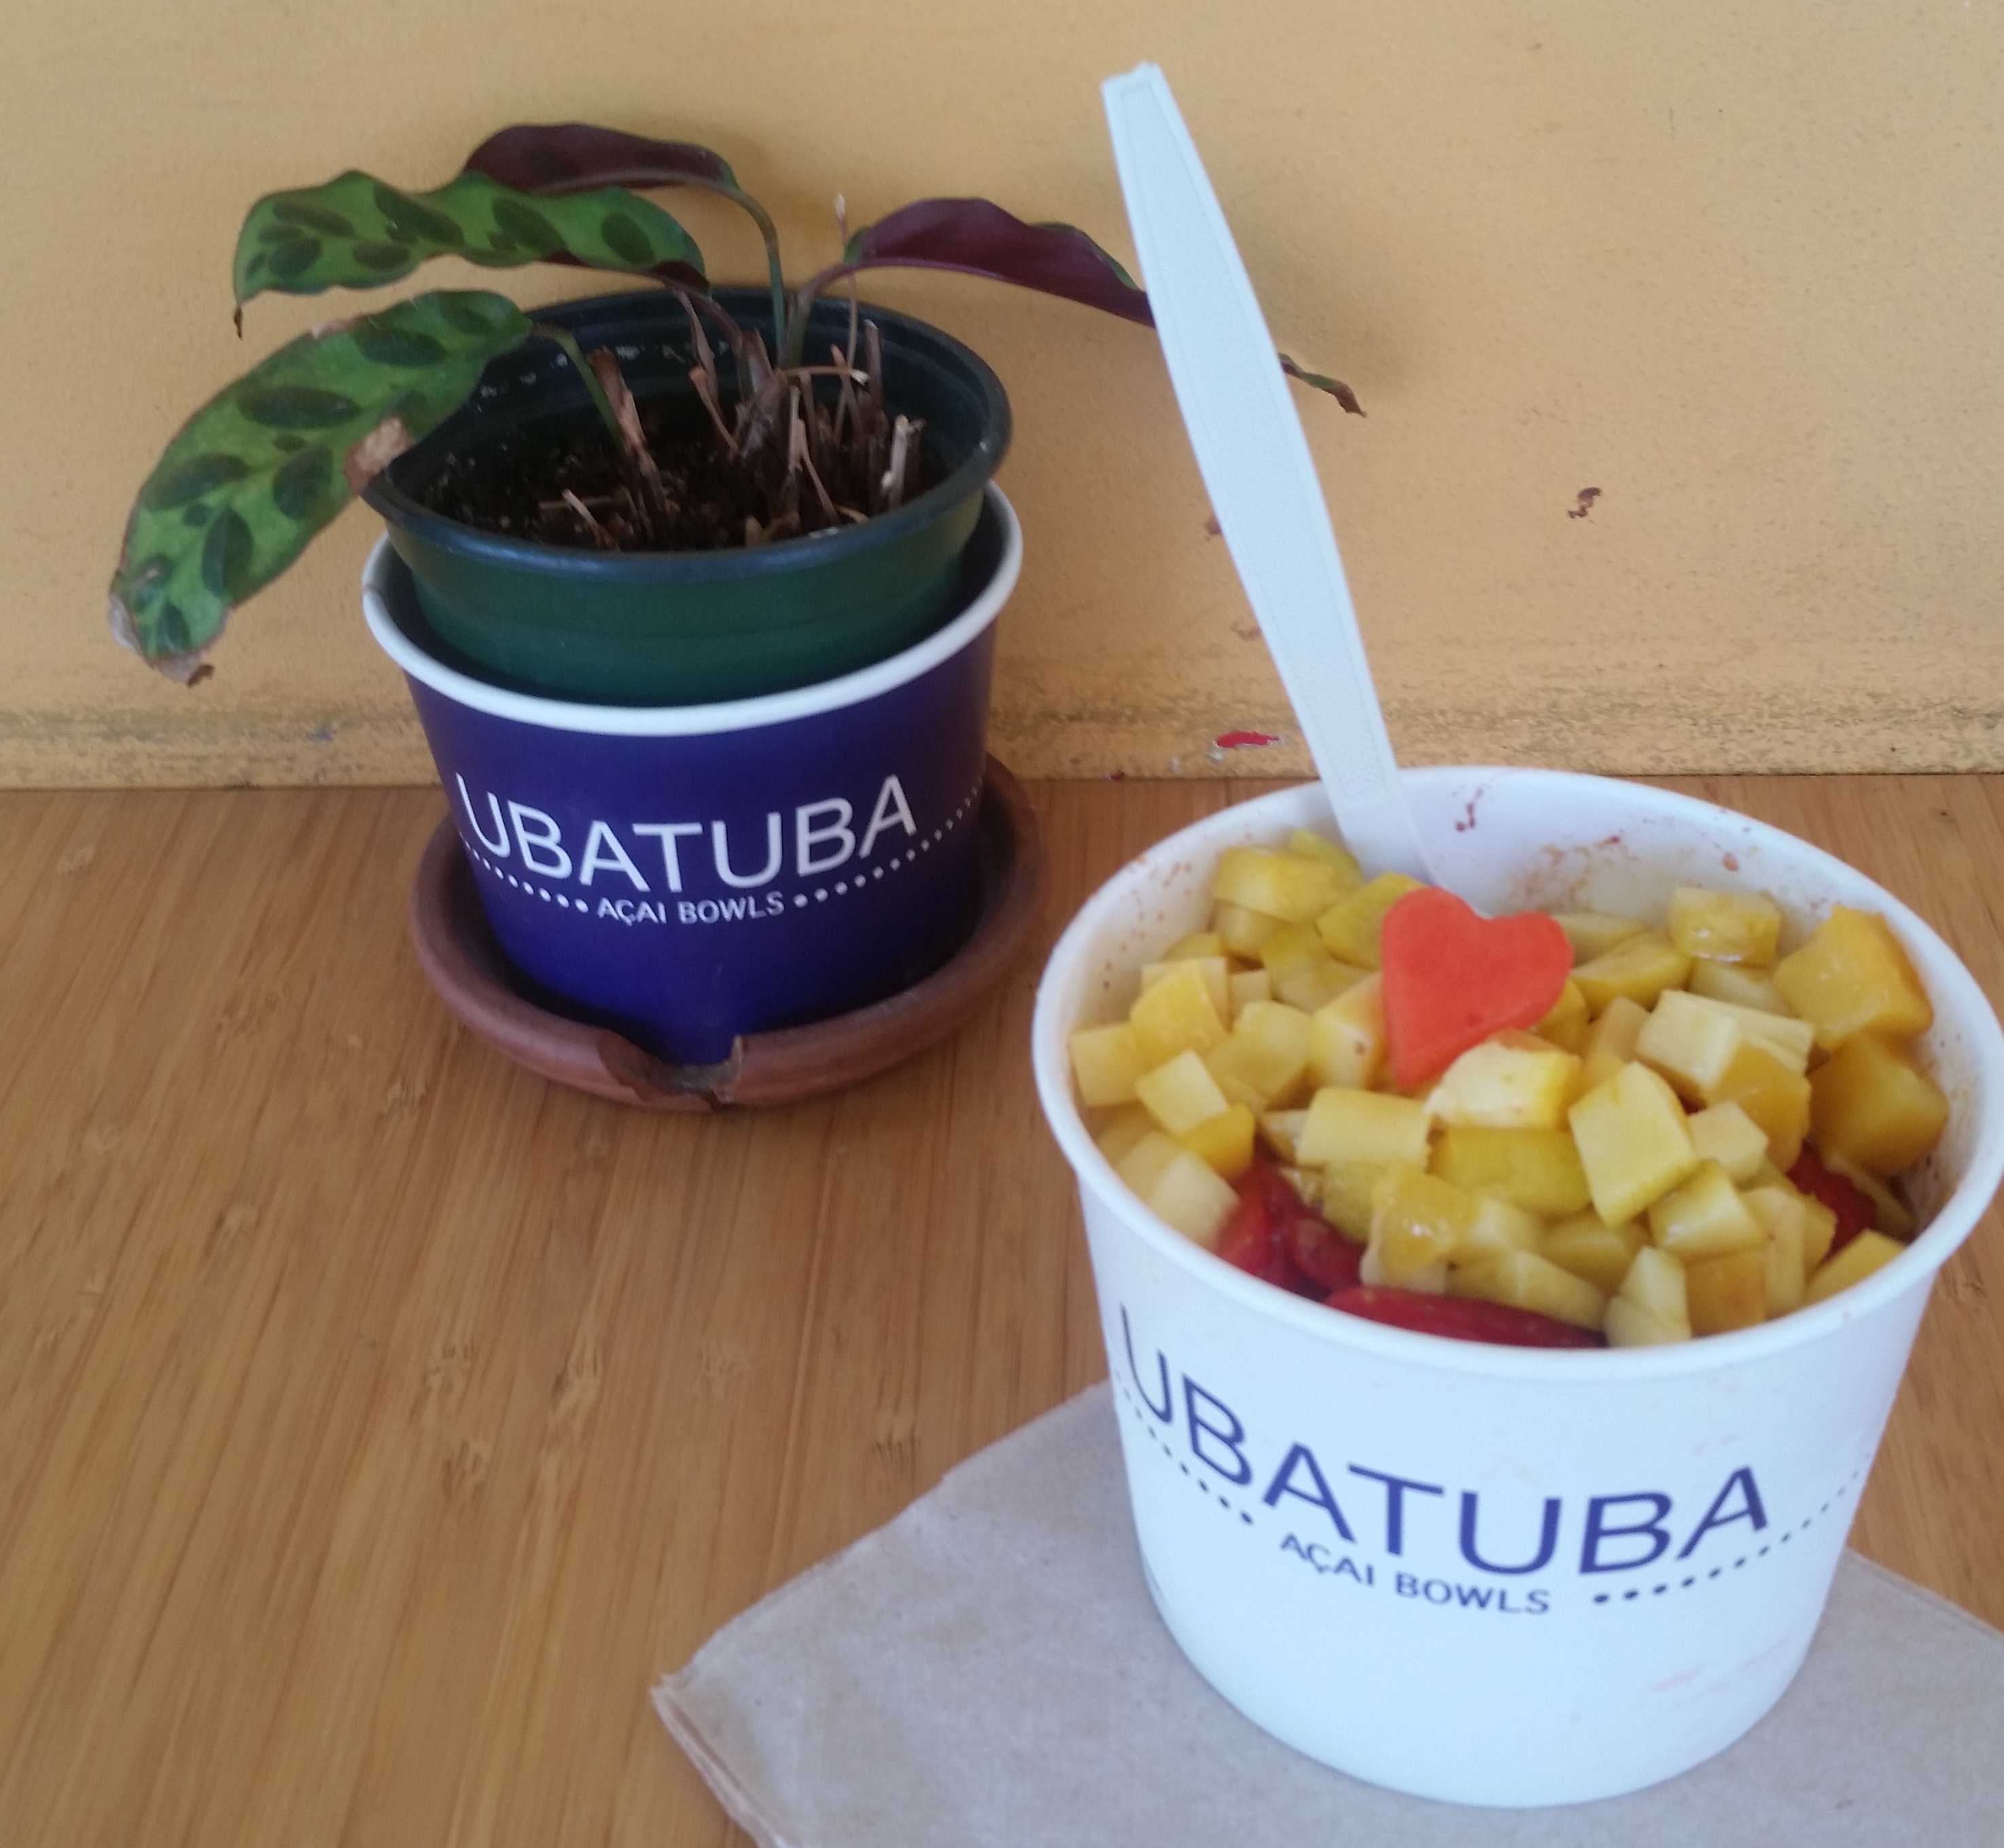 One of Ubatuba's acai bowls garnished with toppings. Photo credit: Donna Lugo